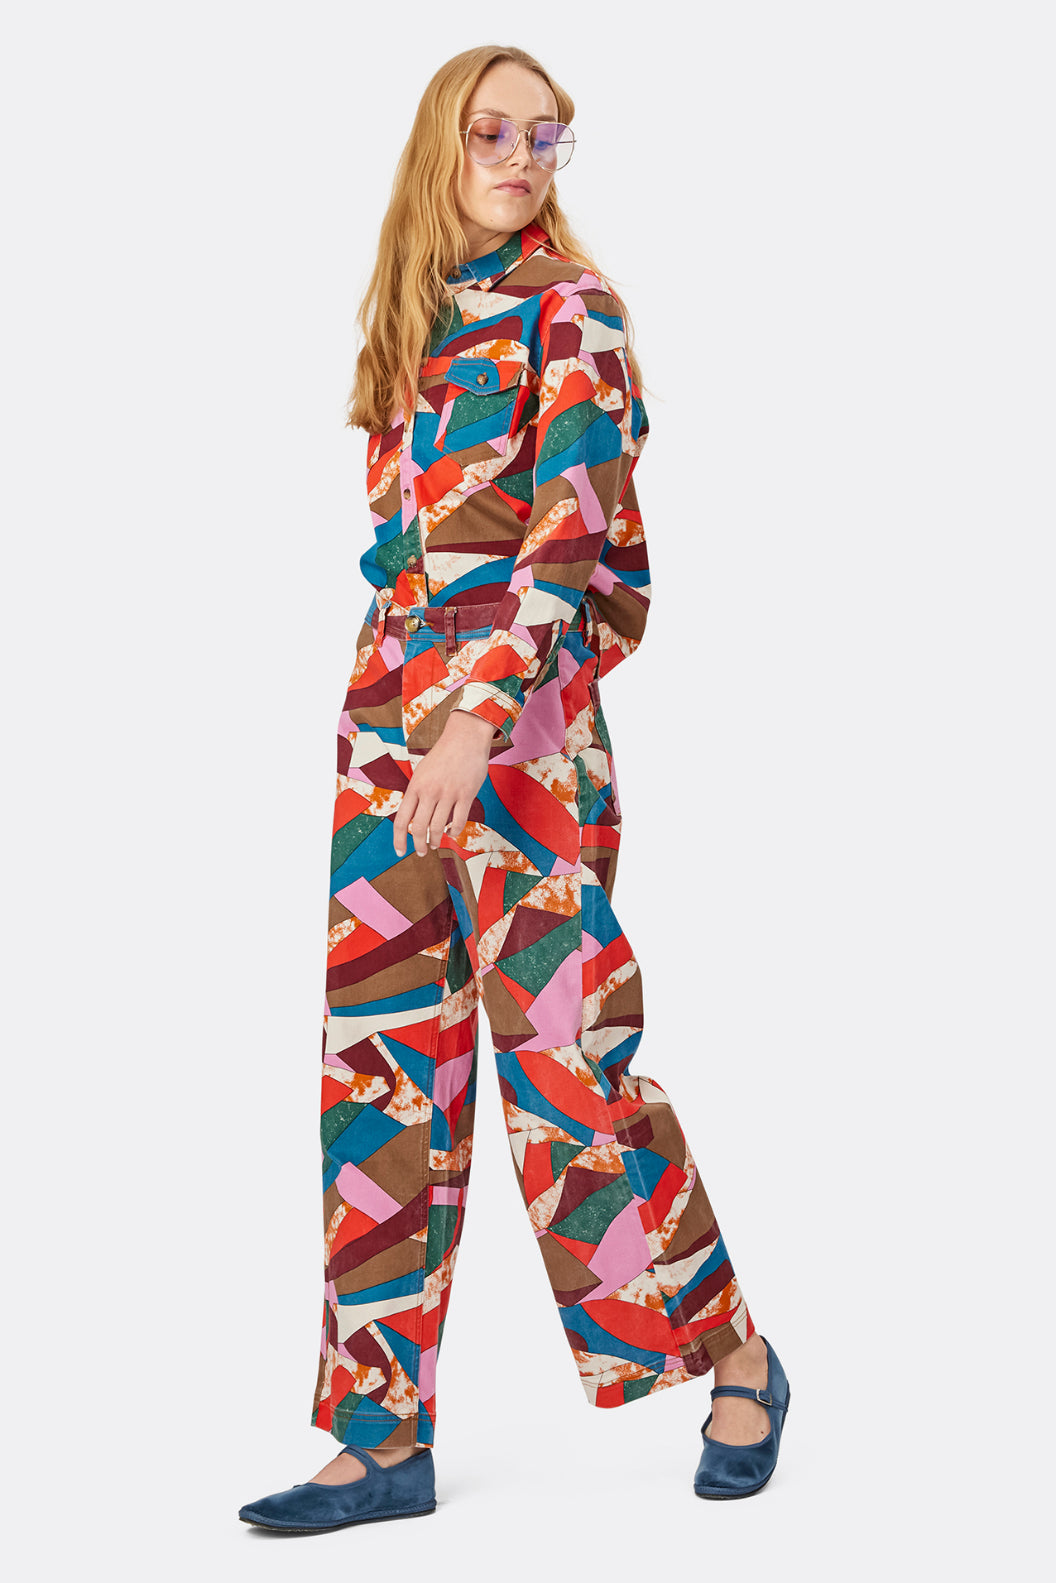 Lollys Laundry - Florida Pants in Multi colour